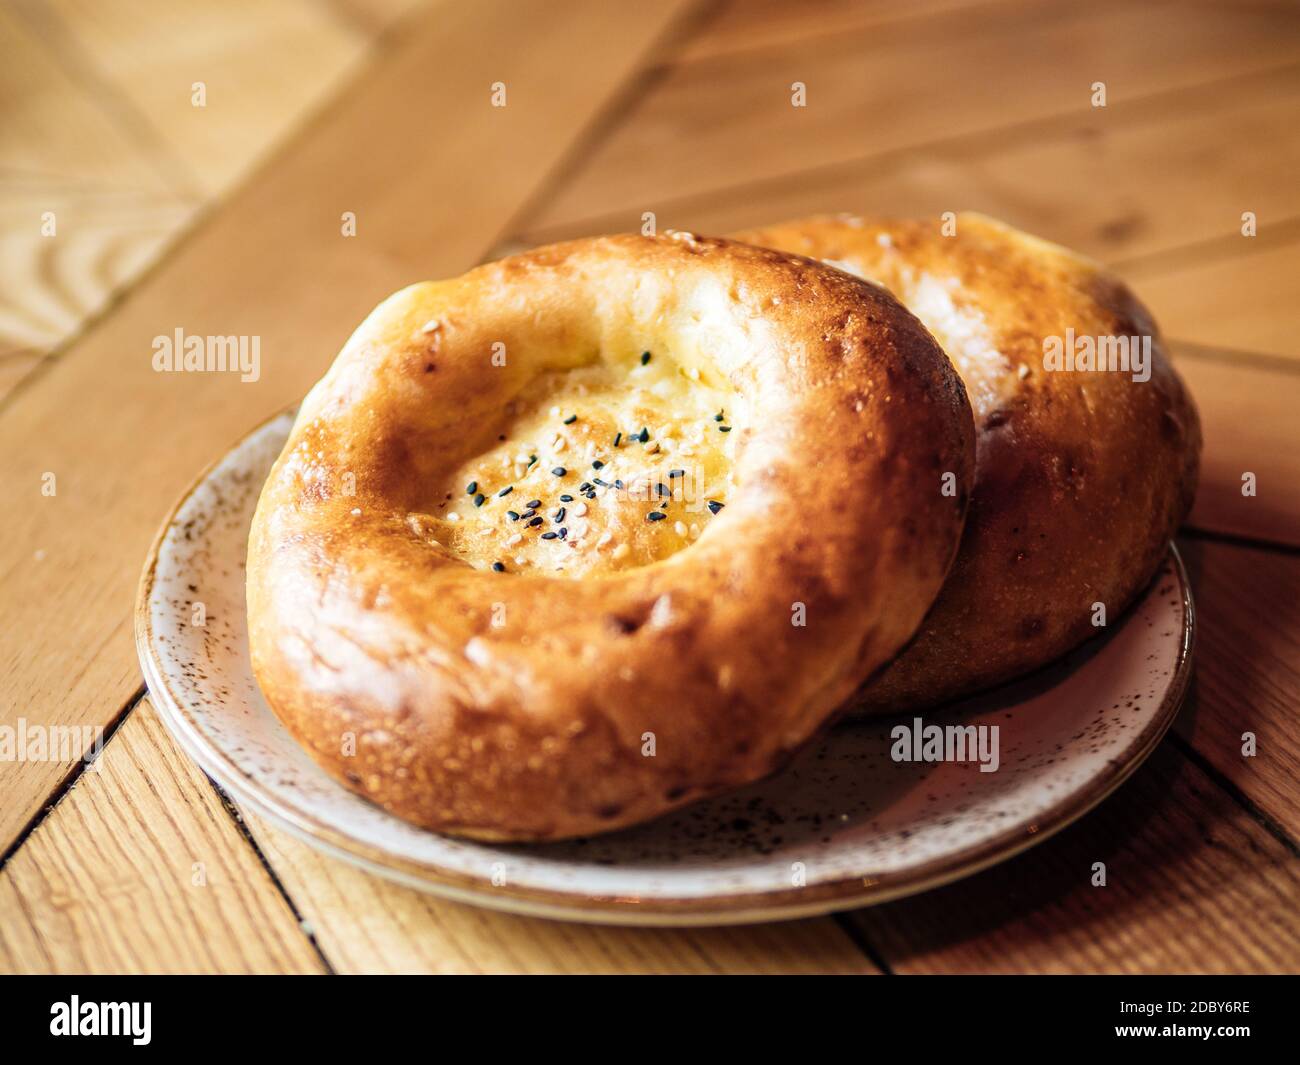 Tasty fresh tandoor bread on rustic wooden tabletop. Two tandoor flat bread cake with black sesame seeds on yellow wooden table background. National a Stock Photo